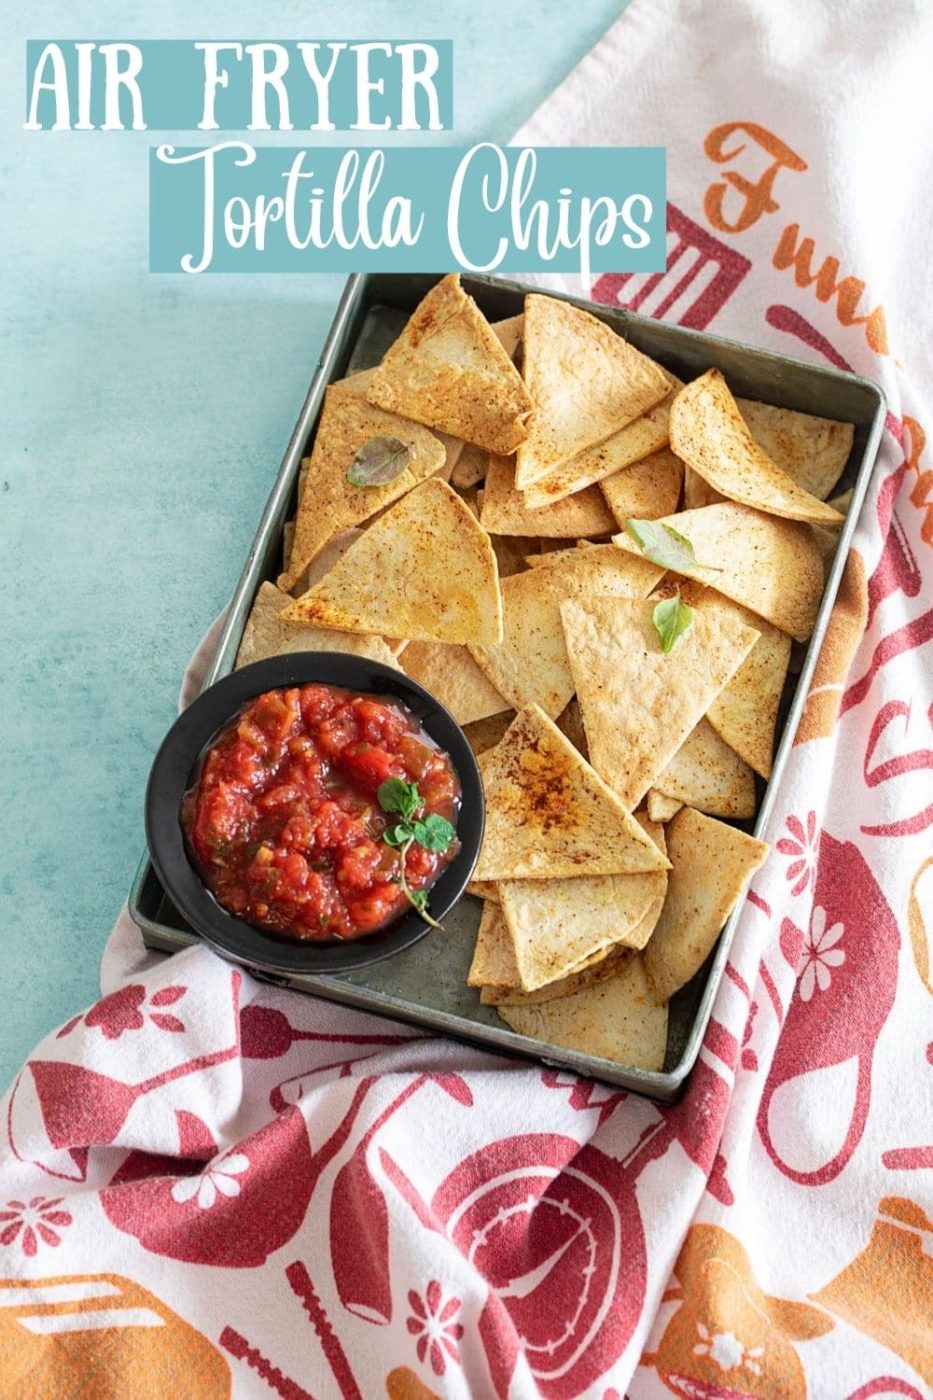 top view of a grey pan filled with air fryer tortilla chips and a salsa plate placed on the inner left side of pan. Grey pan is on top of a colorful kitchen towel